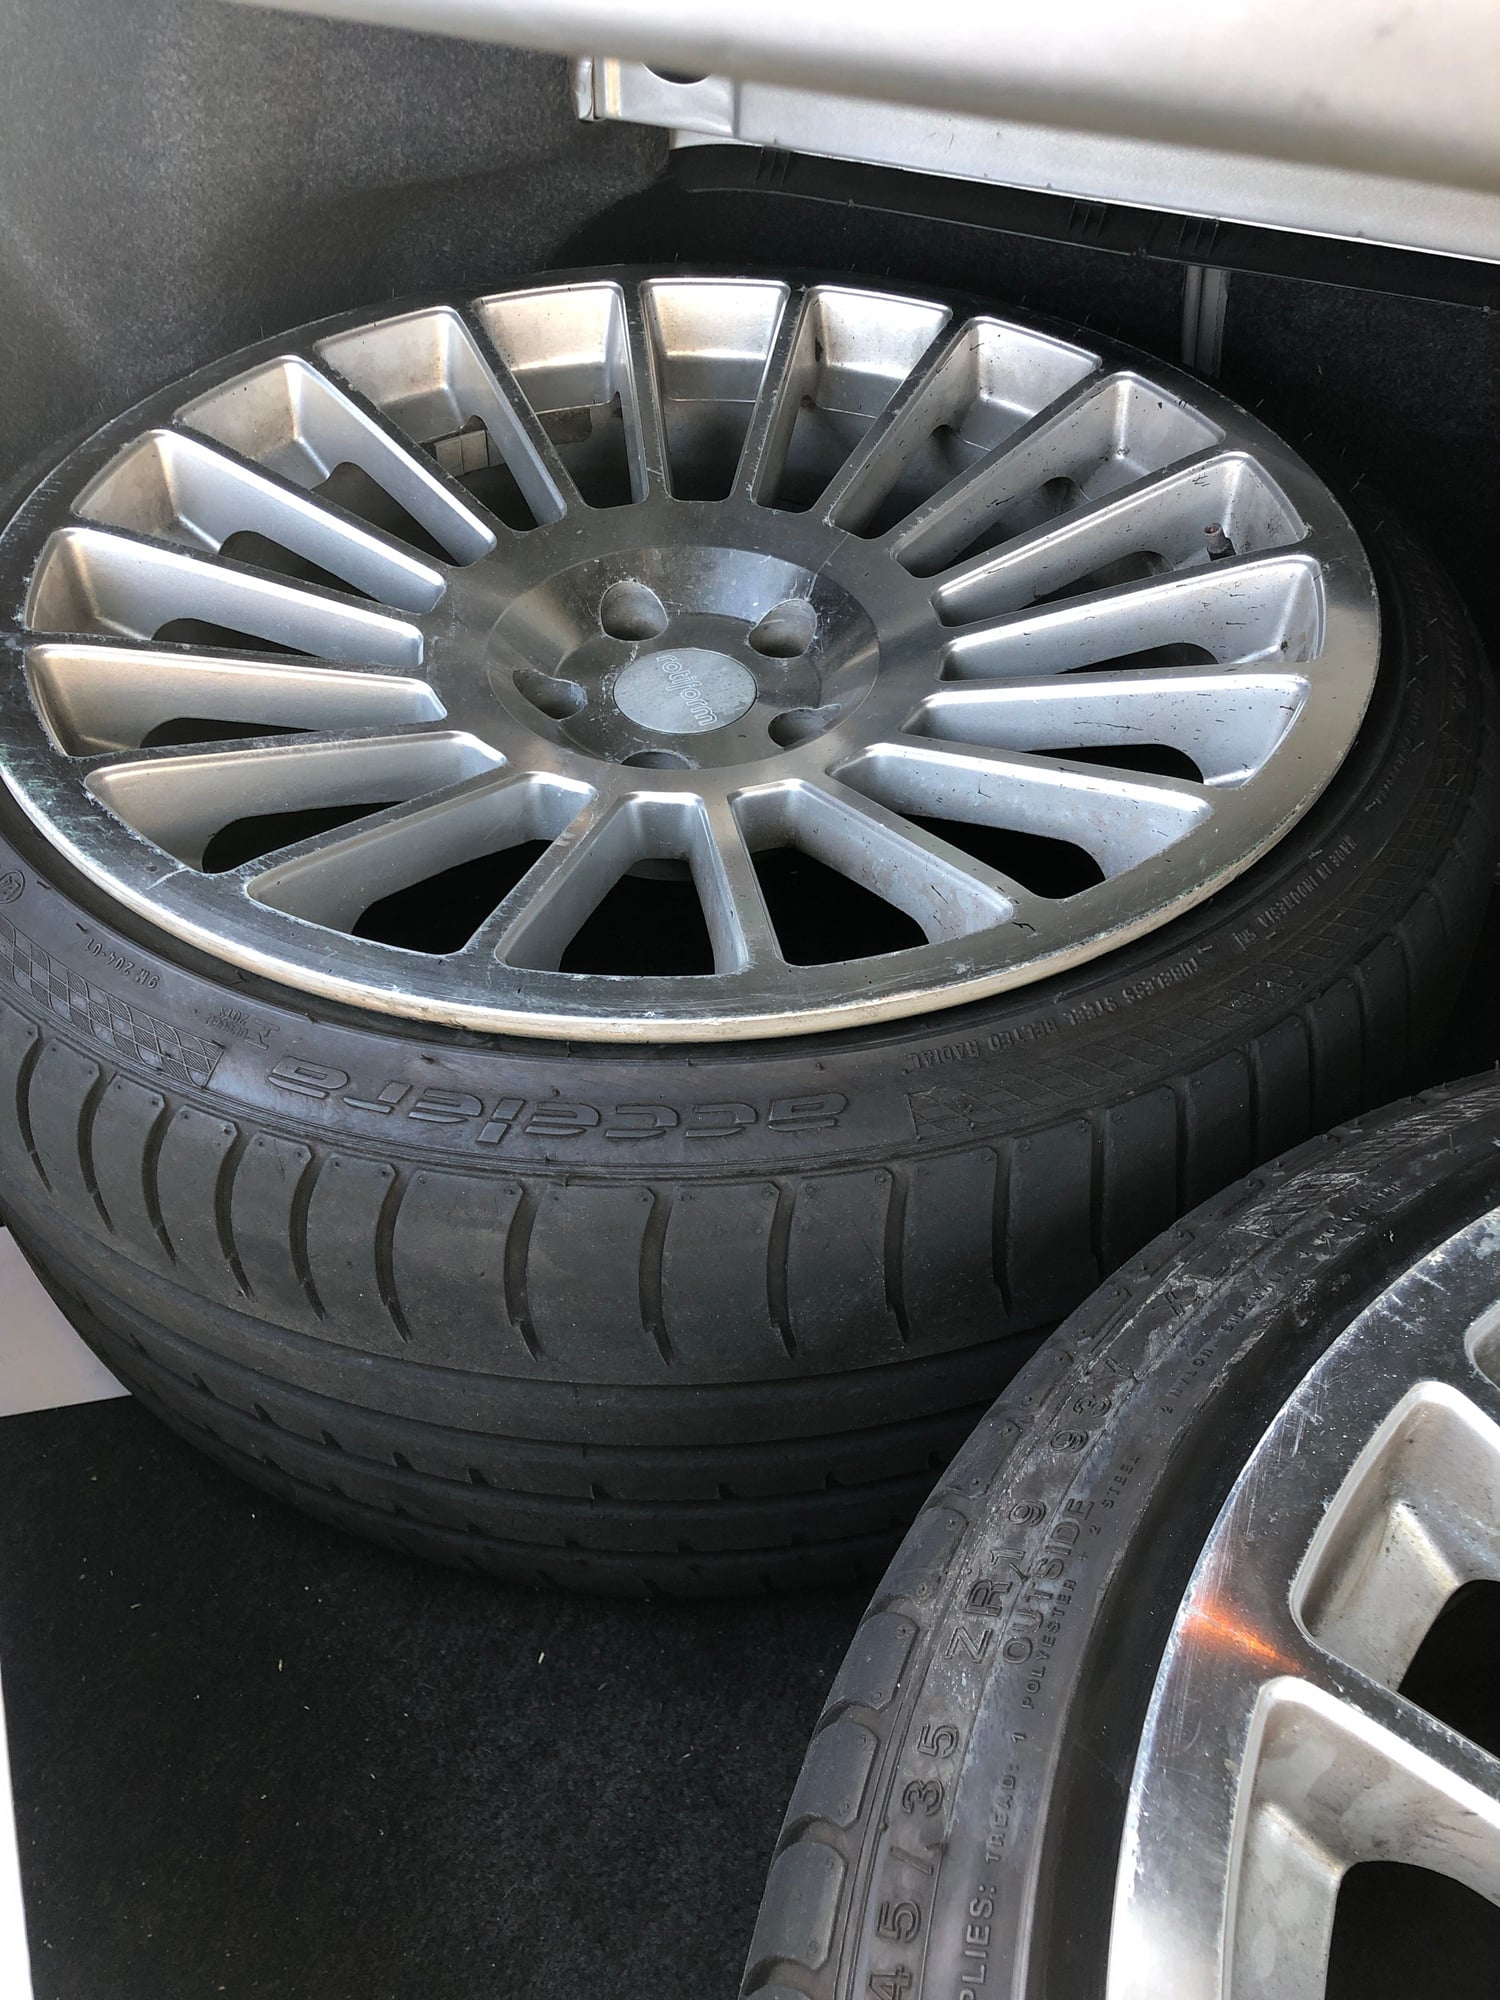 Wheels and Tires/Axles - 19 inch rotiform wheels and tires - Used - Los Angeles, CA 90210, United States